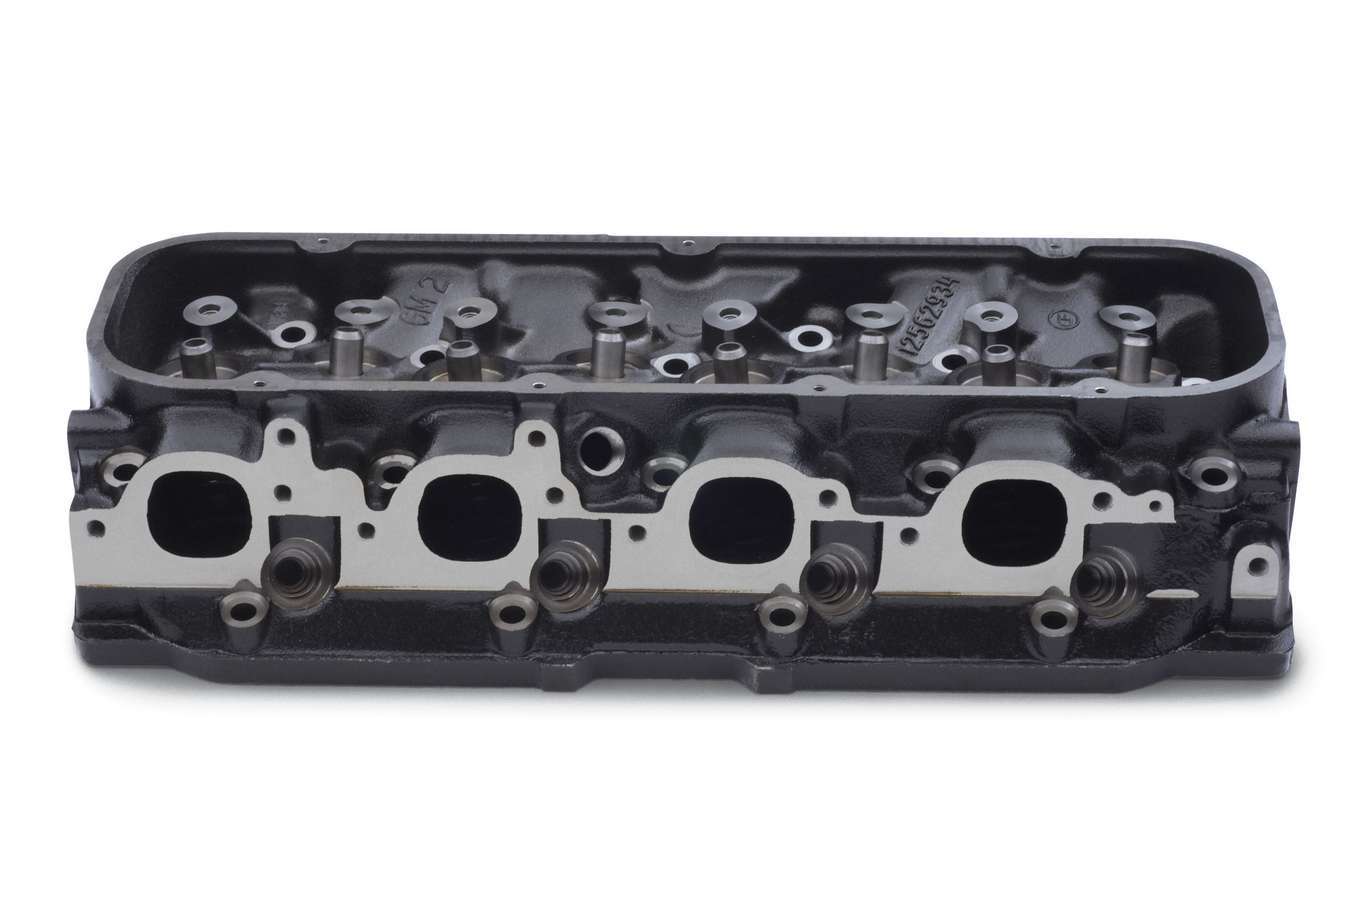 Chevrolet Performance 12562925 Cylinder Head, Service Replacement, Bare, 2.180 / 1.880 in Valve, 325 cc Intake, 118 cc Chamber, Cast Iron, Big Block Chevy, Each